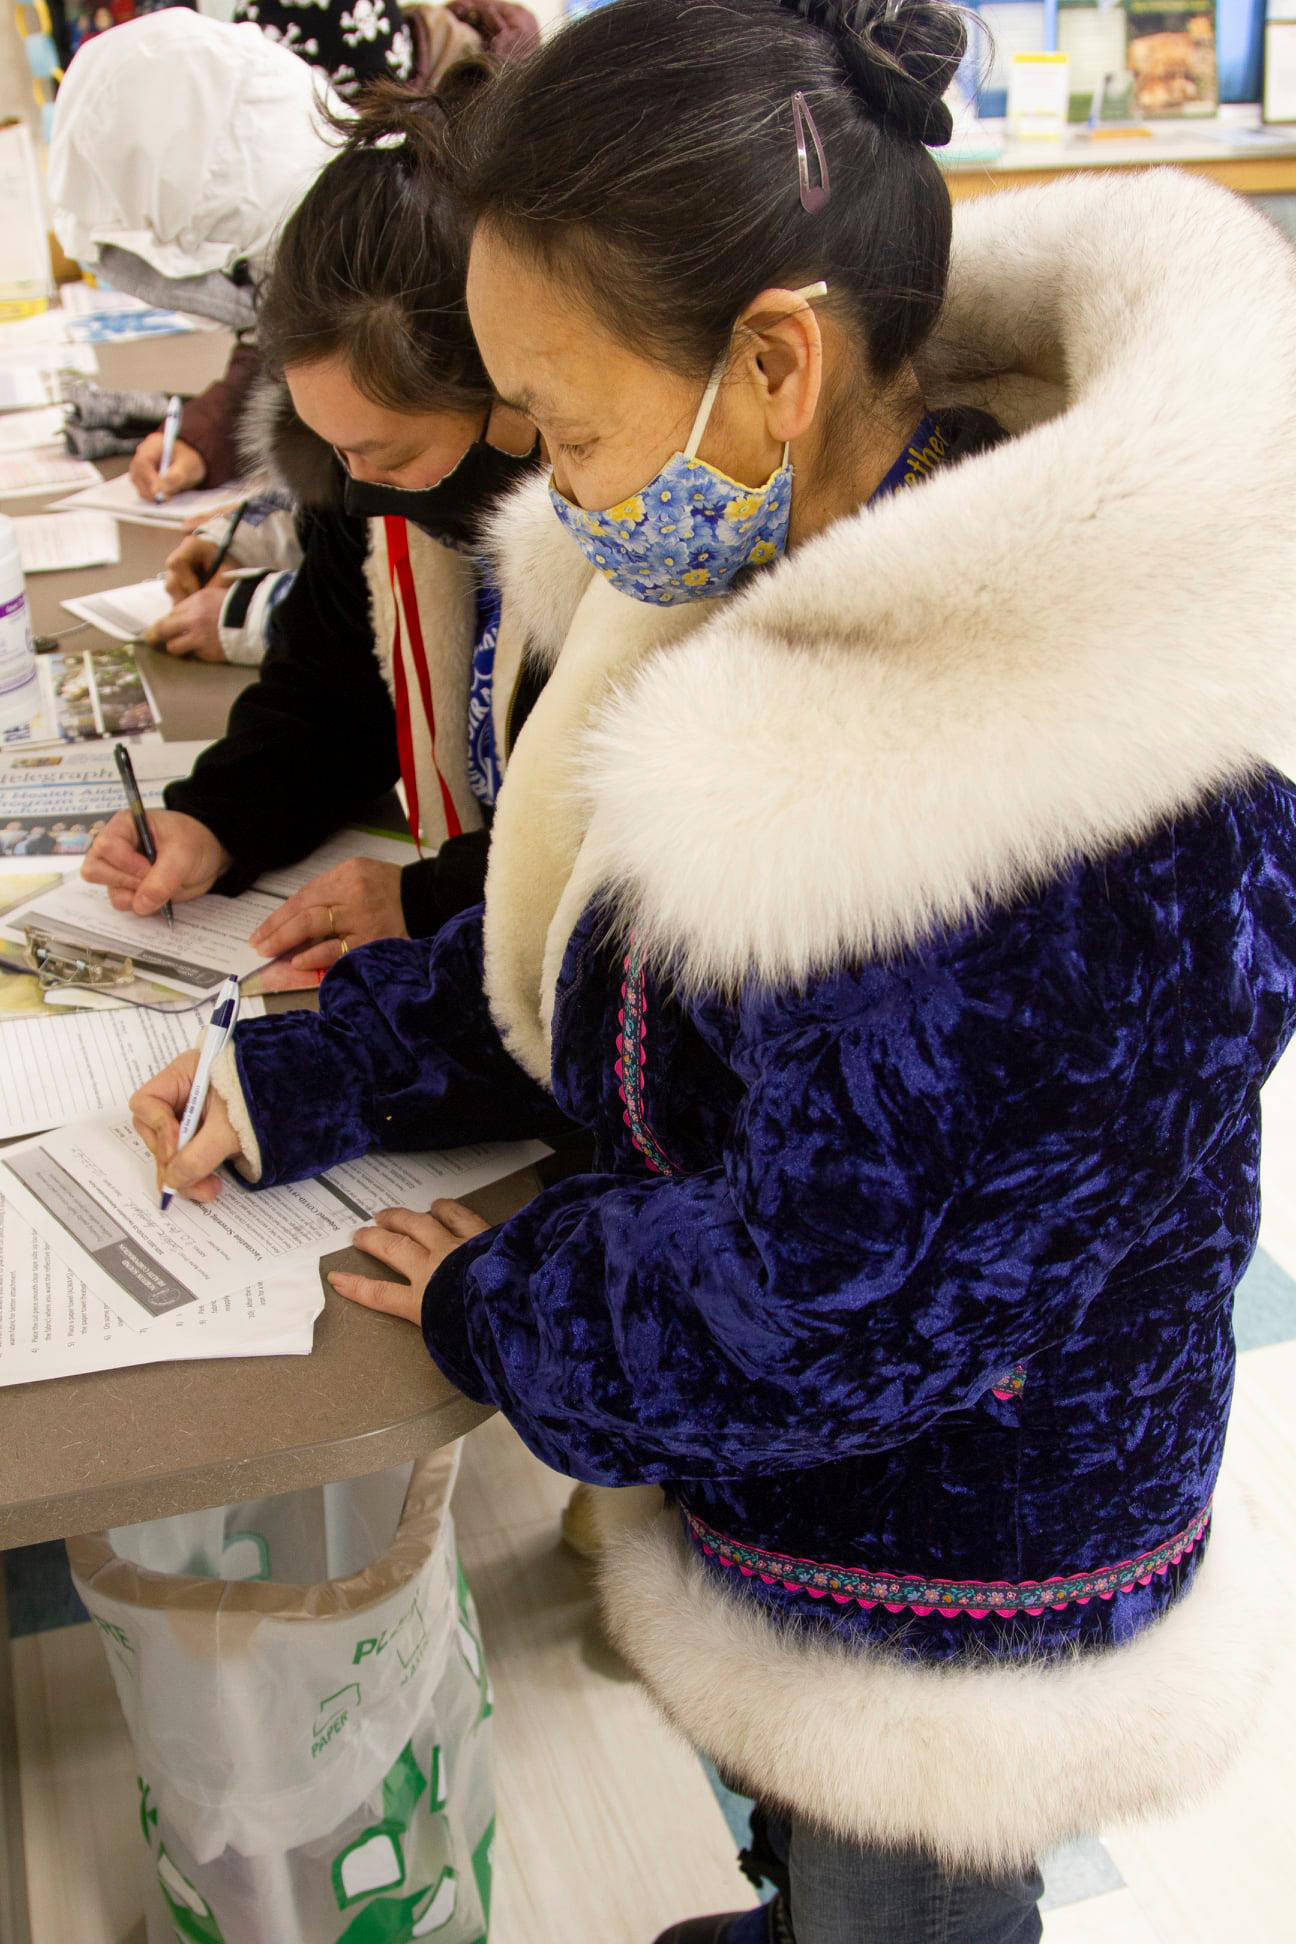 In this photo, provided by Norton Sound Health Corp., are Joey Annogiyuk, left, and Miriam Toolie signing up to receive the Pfizer vaccine at the Savoonga Clinic in Savoonga, Alaska, on Jan. 14, 2021. Some of Alaska’s highest vaccination rates among those 16 or older have been in some of its remotest, hardest-to-access communities, where the toll of past flu or tuberculosis outbreaks hasn’t been forgotten. (Reba Lean/Norton Sound Health Corp. via AP)